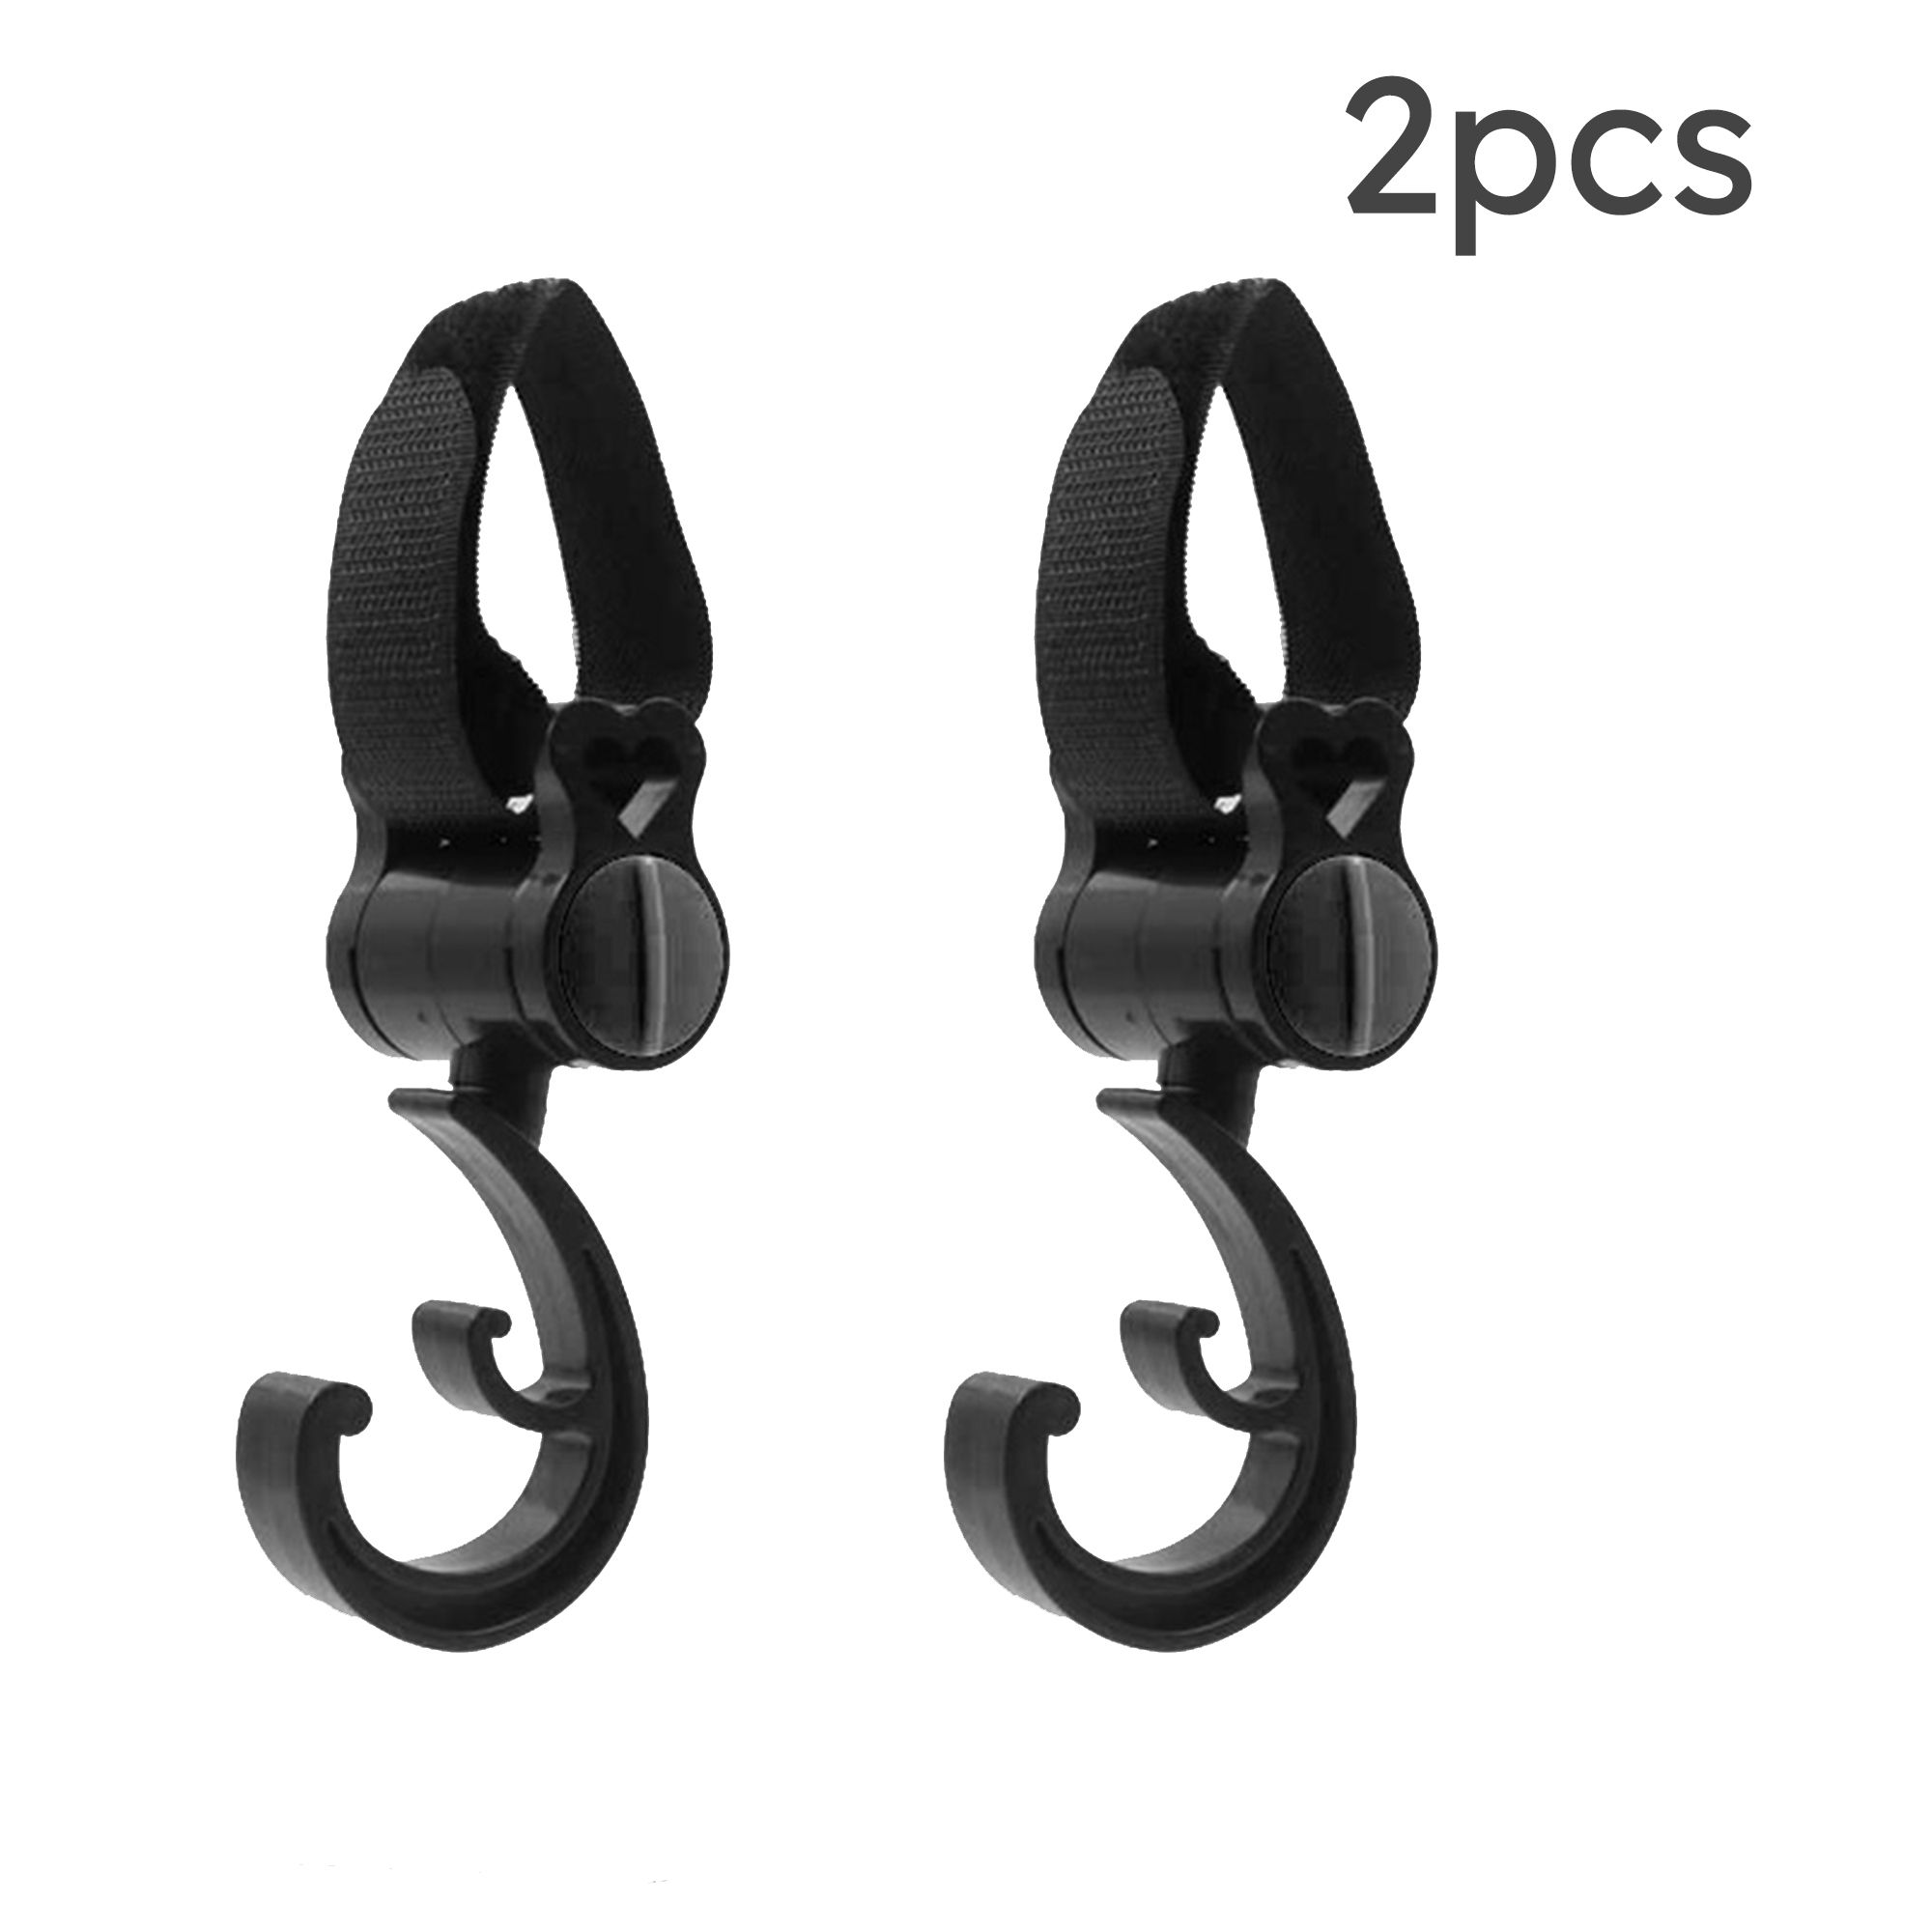 360Â° Rotating Hook For Baby Strollers And Cribs - Multifunctional Hanger For Diaper Bags And Shopping Bags